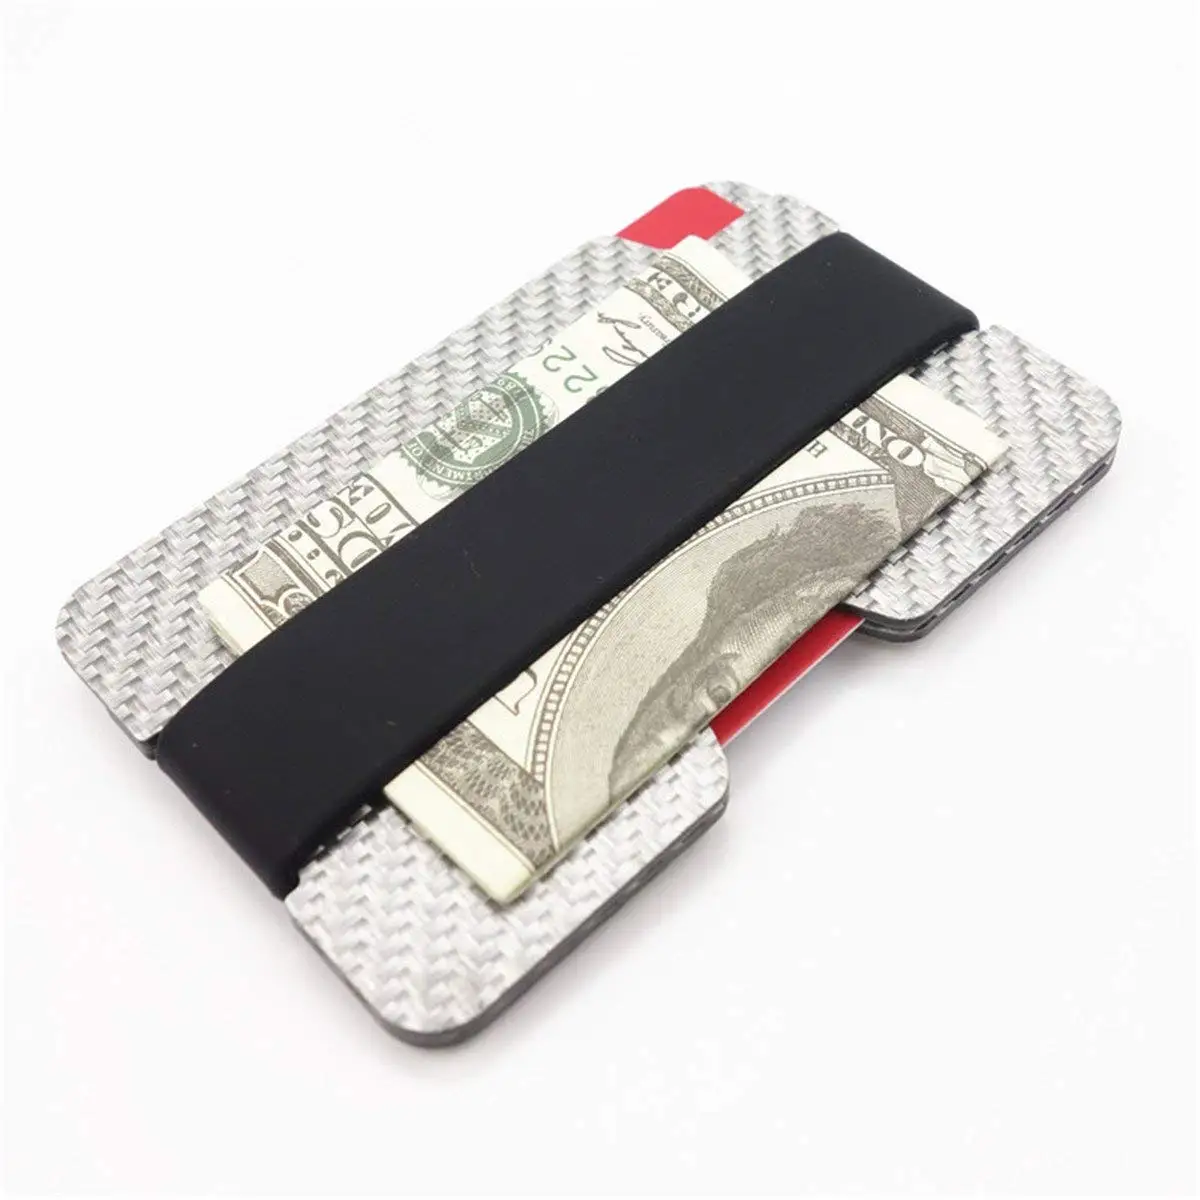 Jack Cube Carbon Fiber Business Card Organizer Business Card Holder Name Card Organizer Name Card Holder With Removable Divider For Desk -MK171 4.29 x 1.76 x 9.75 inches